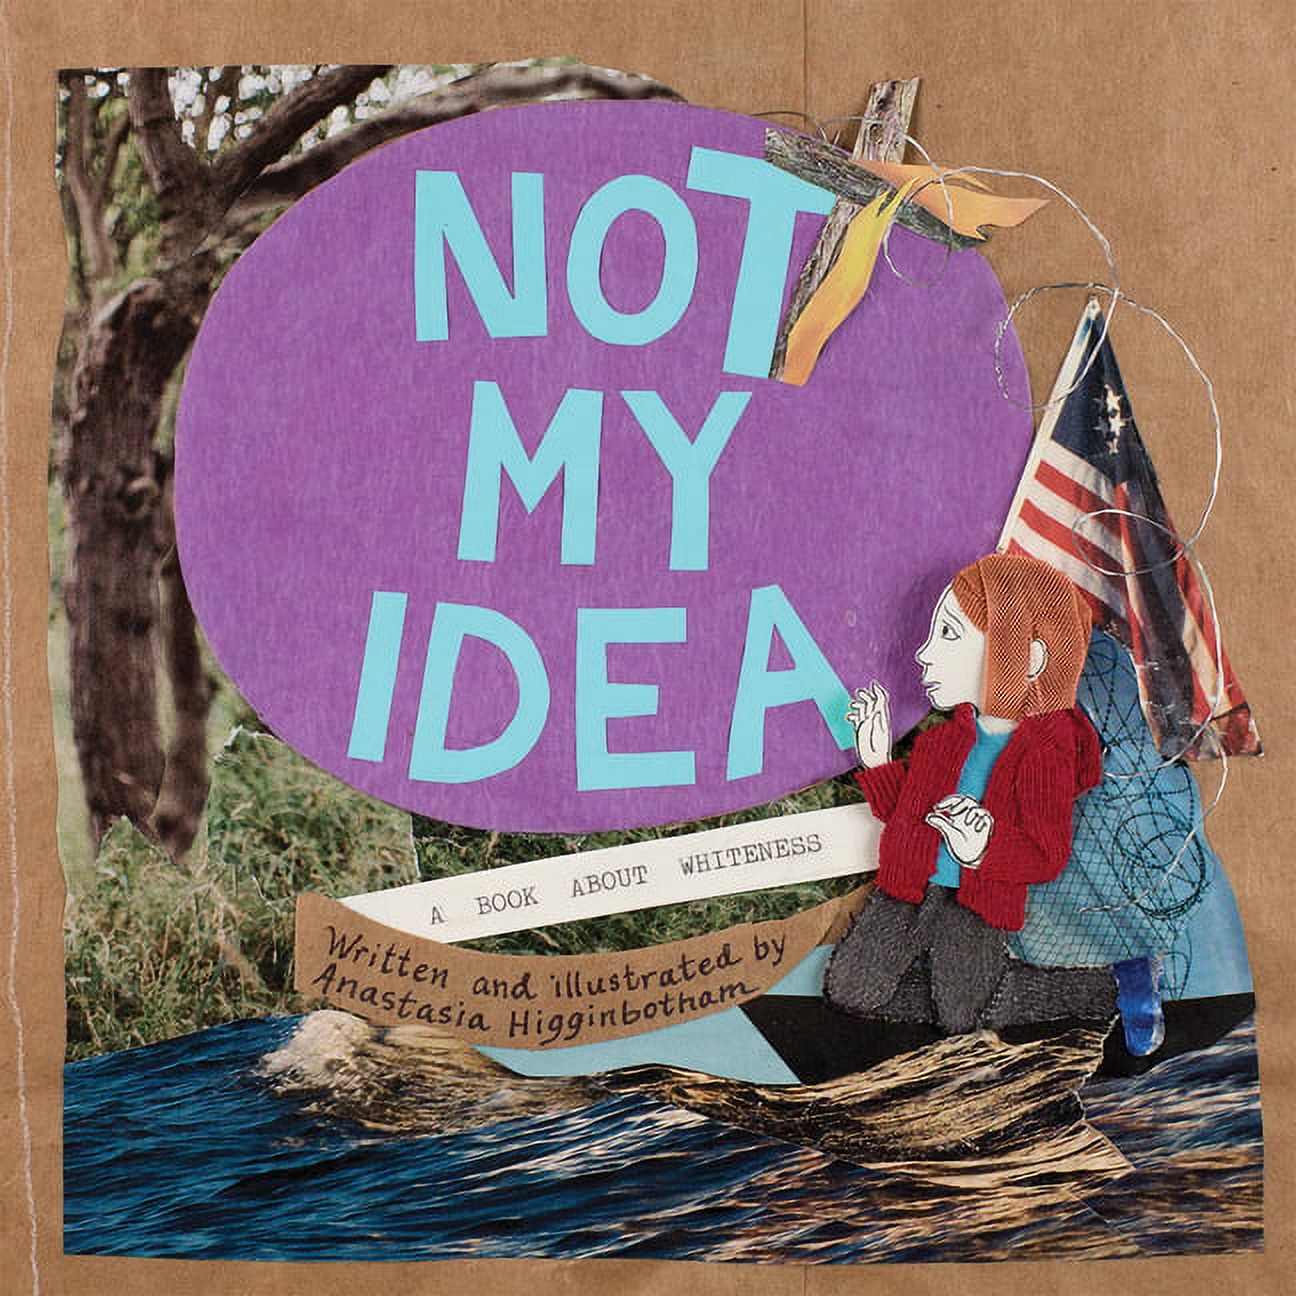 Not My Idea: A Book About Whiteness (Ordinary Terrible Things) - Higginbotham, Anastasia - image 1 of 1